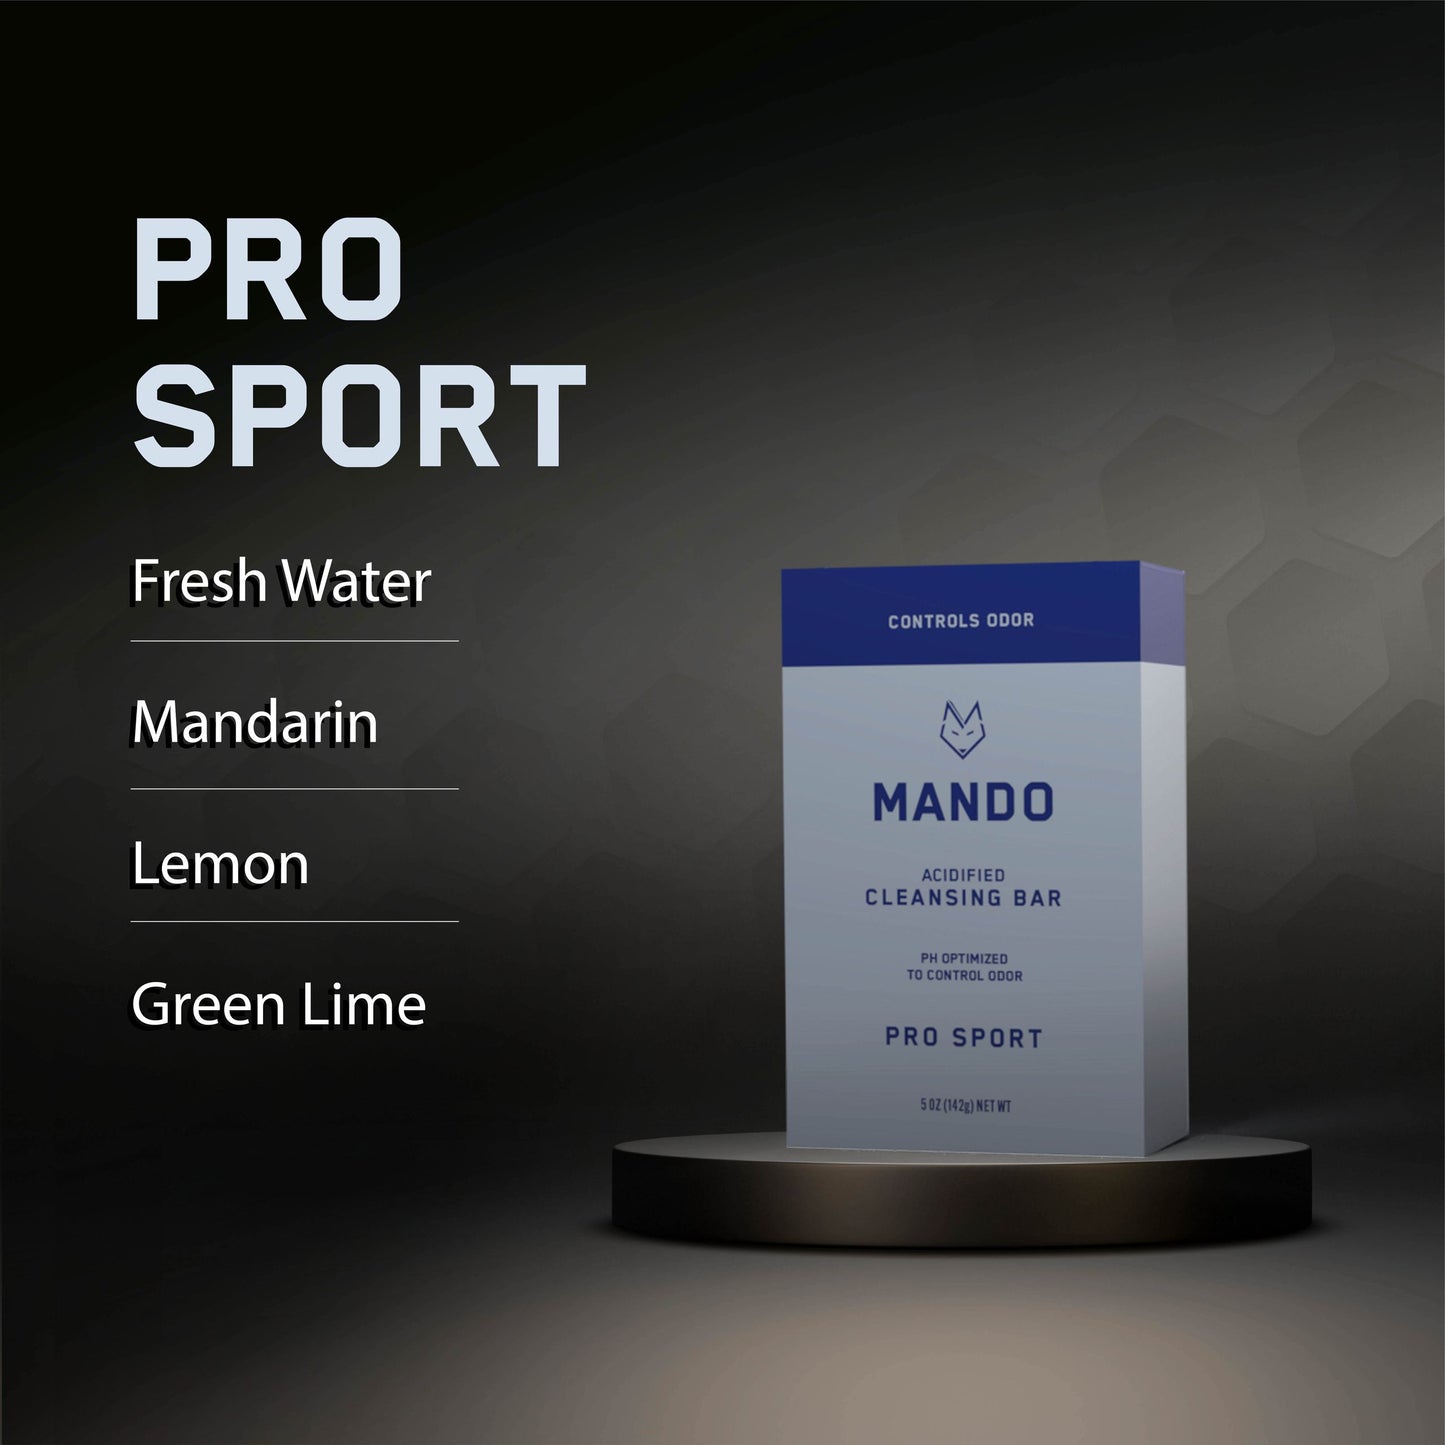 Mando 4-in-1 acidified cleansing bar in Pro Sport scent